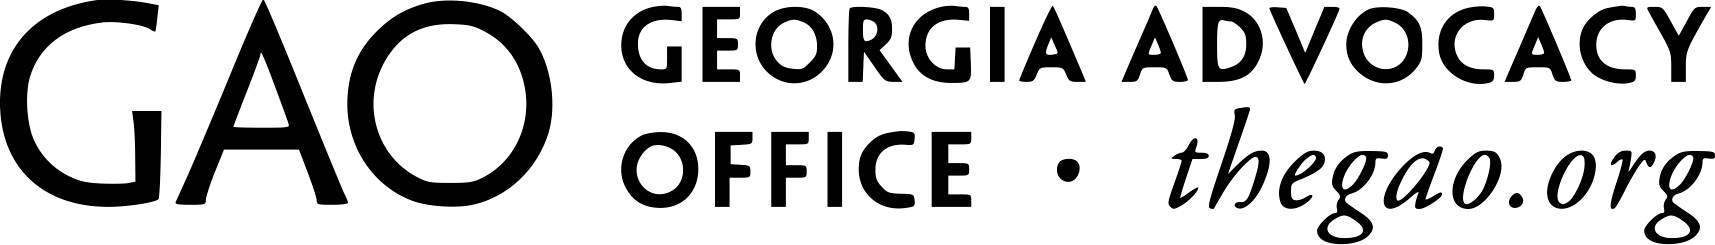 The logo for the Georgia Advocacy Office